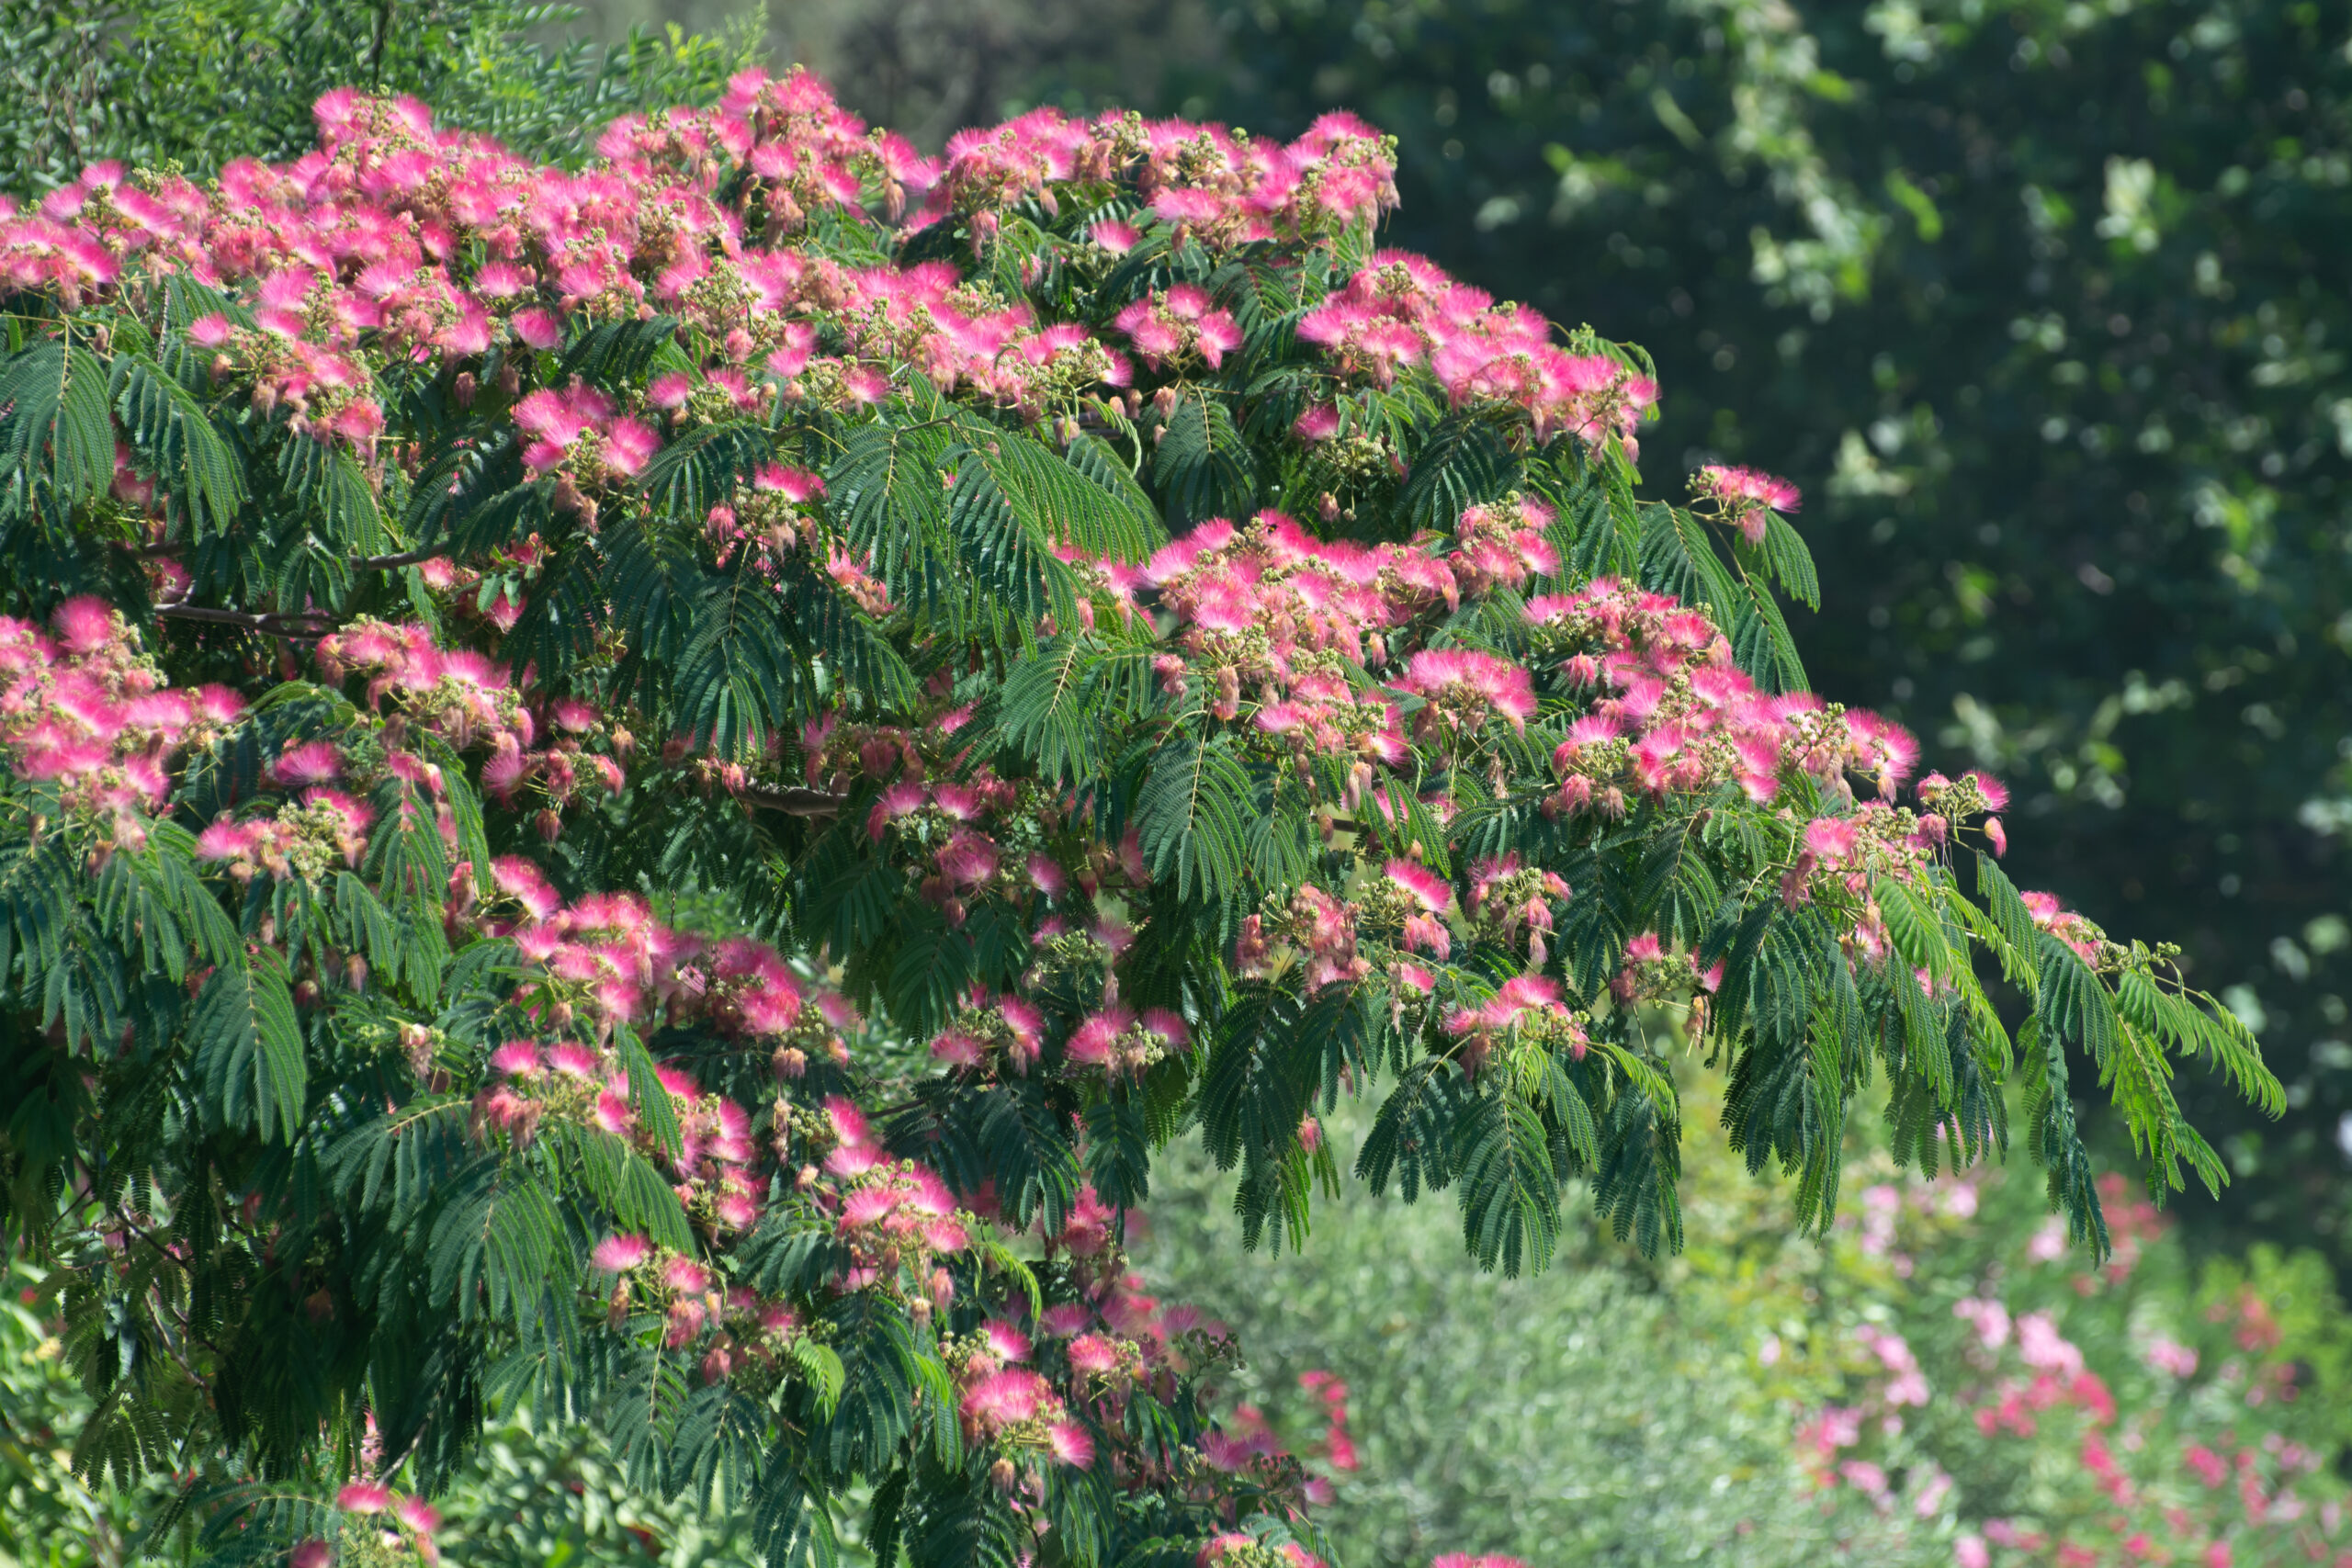 A flower shrub shows its delicate feathery pink flowers.